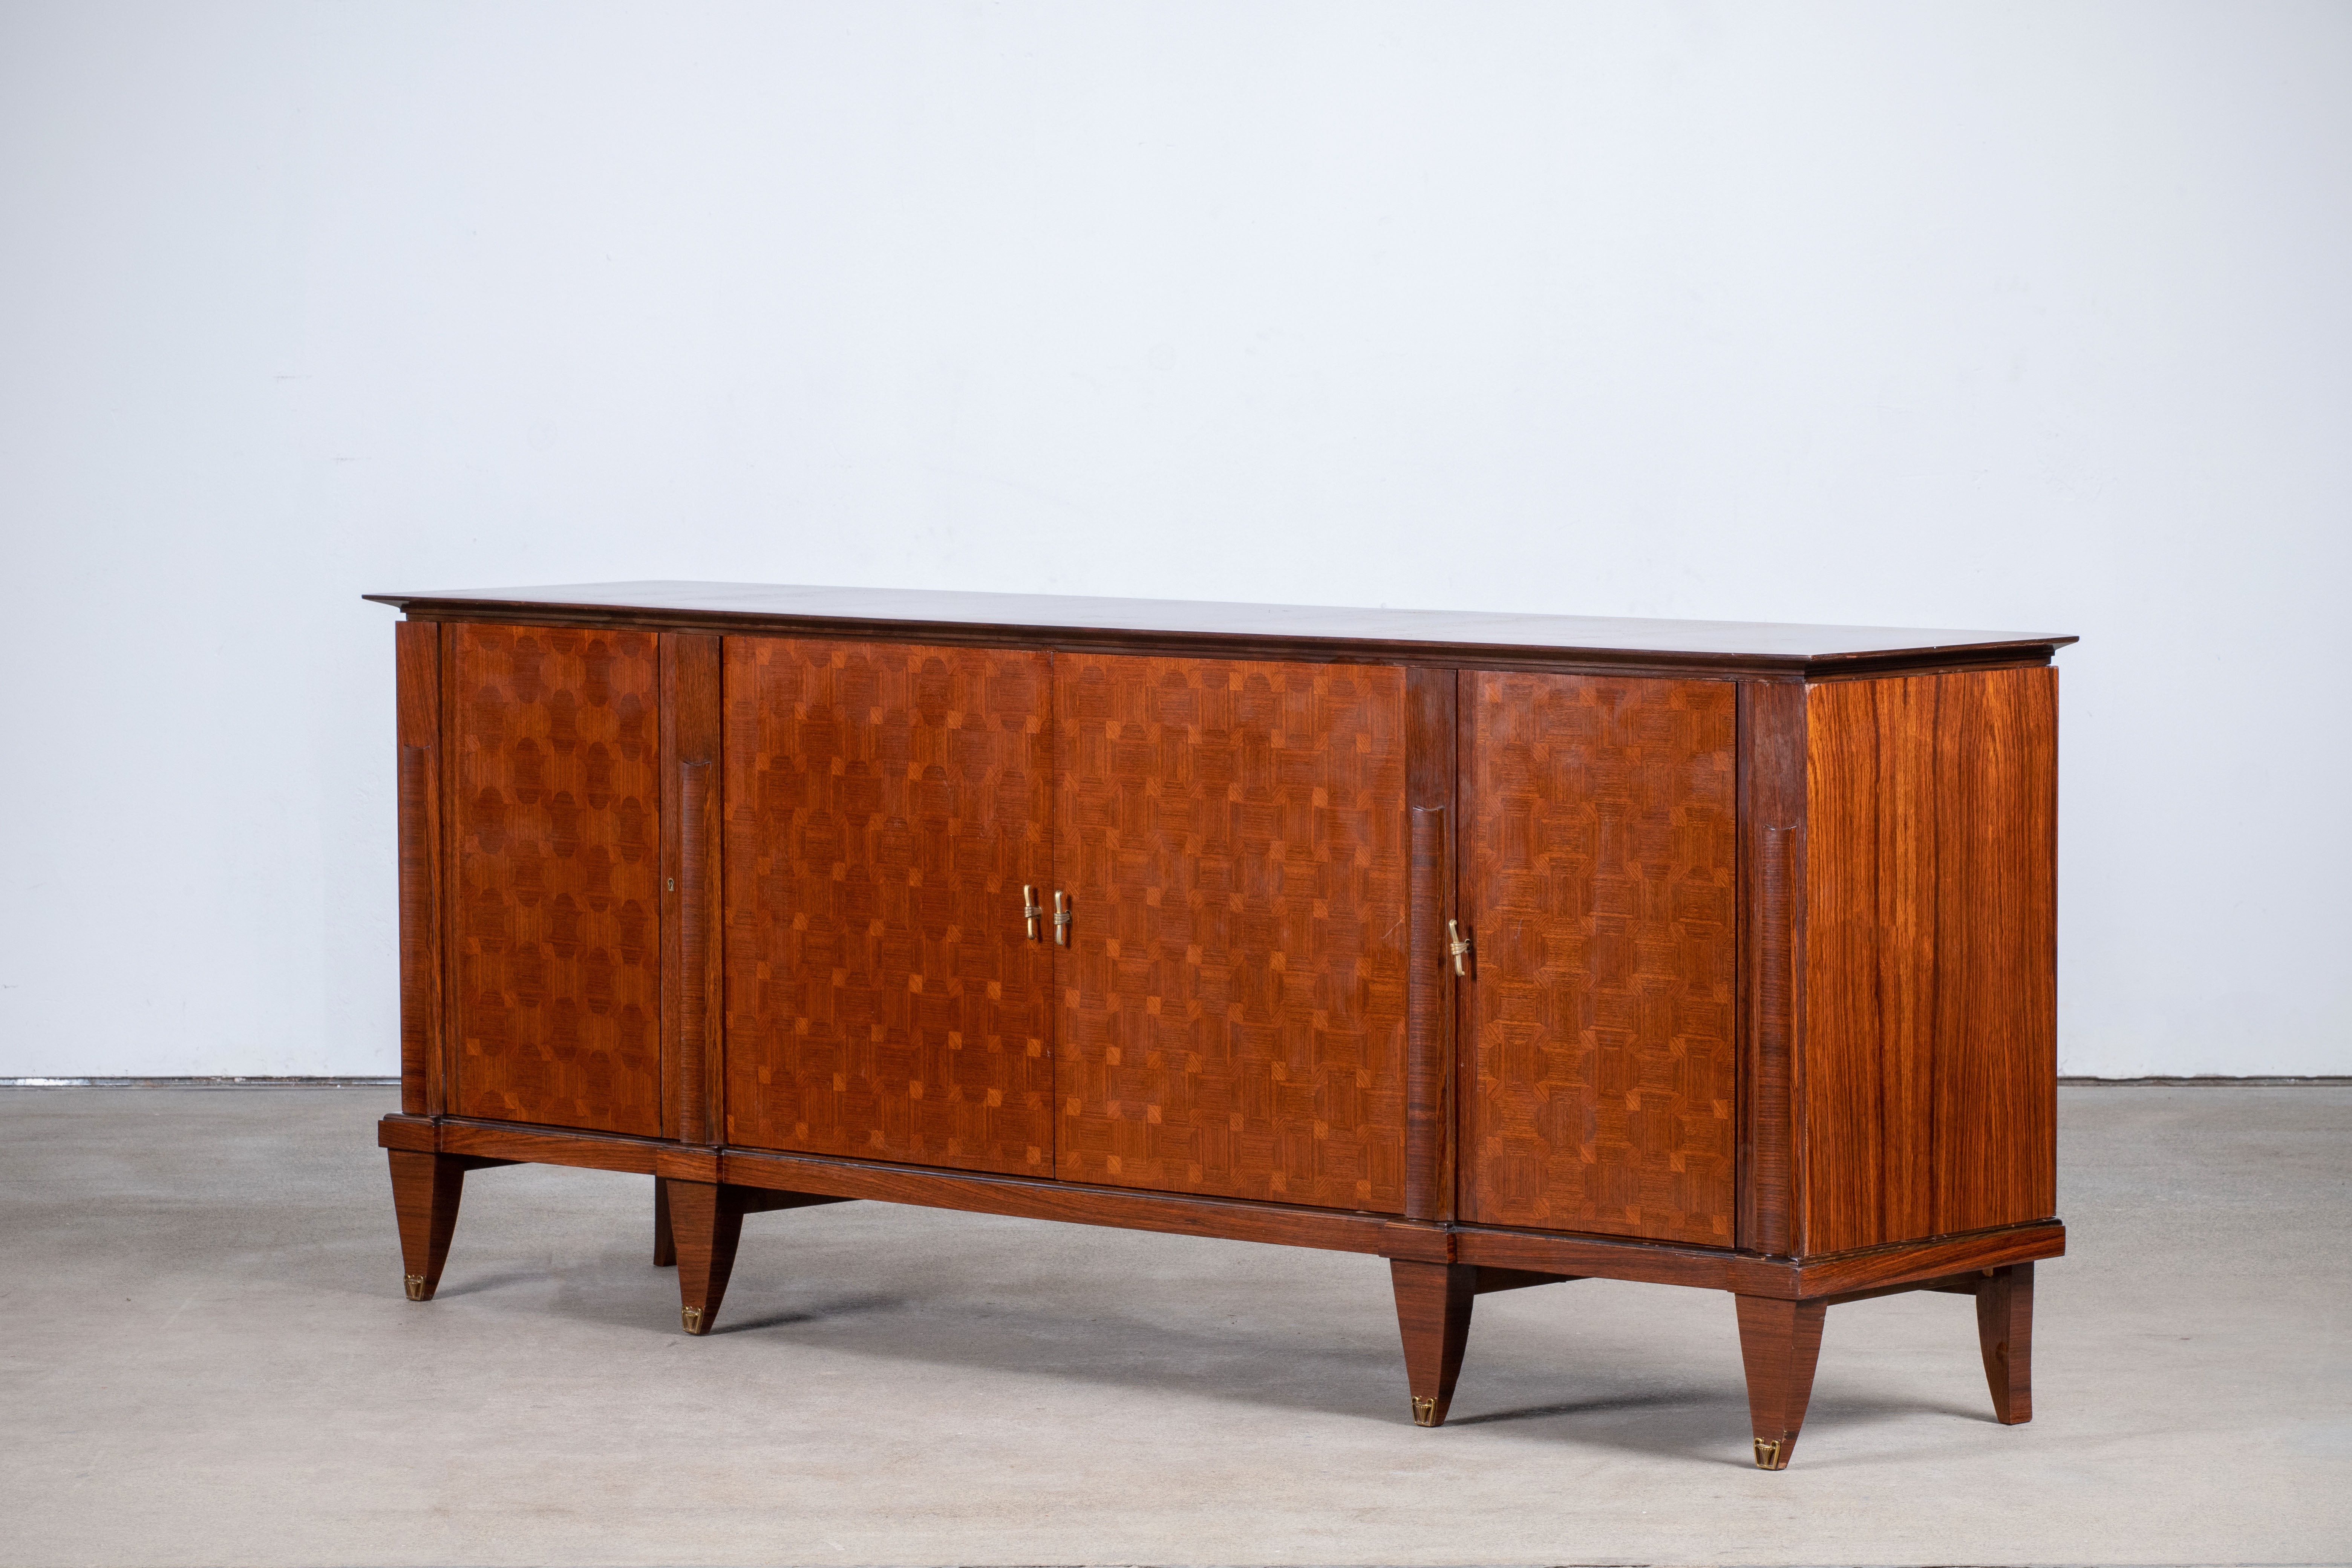 French Art Deco sideboard, credenza, with bar cabinet. The sideboard features stunning Macassar wood grain and rich pattern. It offers ample storage, with shelves and a column of drawers. The case rests on tall tapered legs with brass details. A